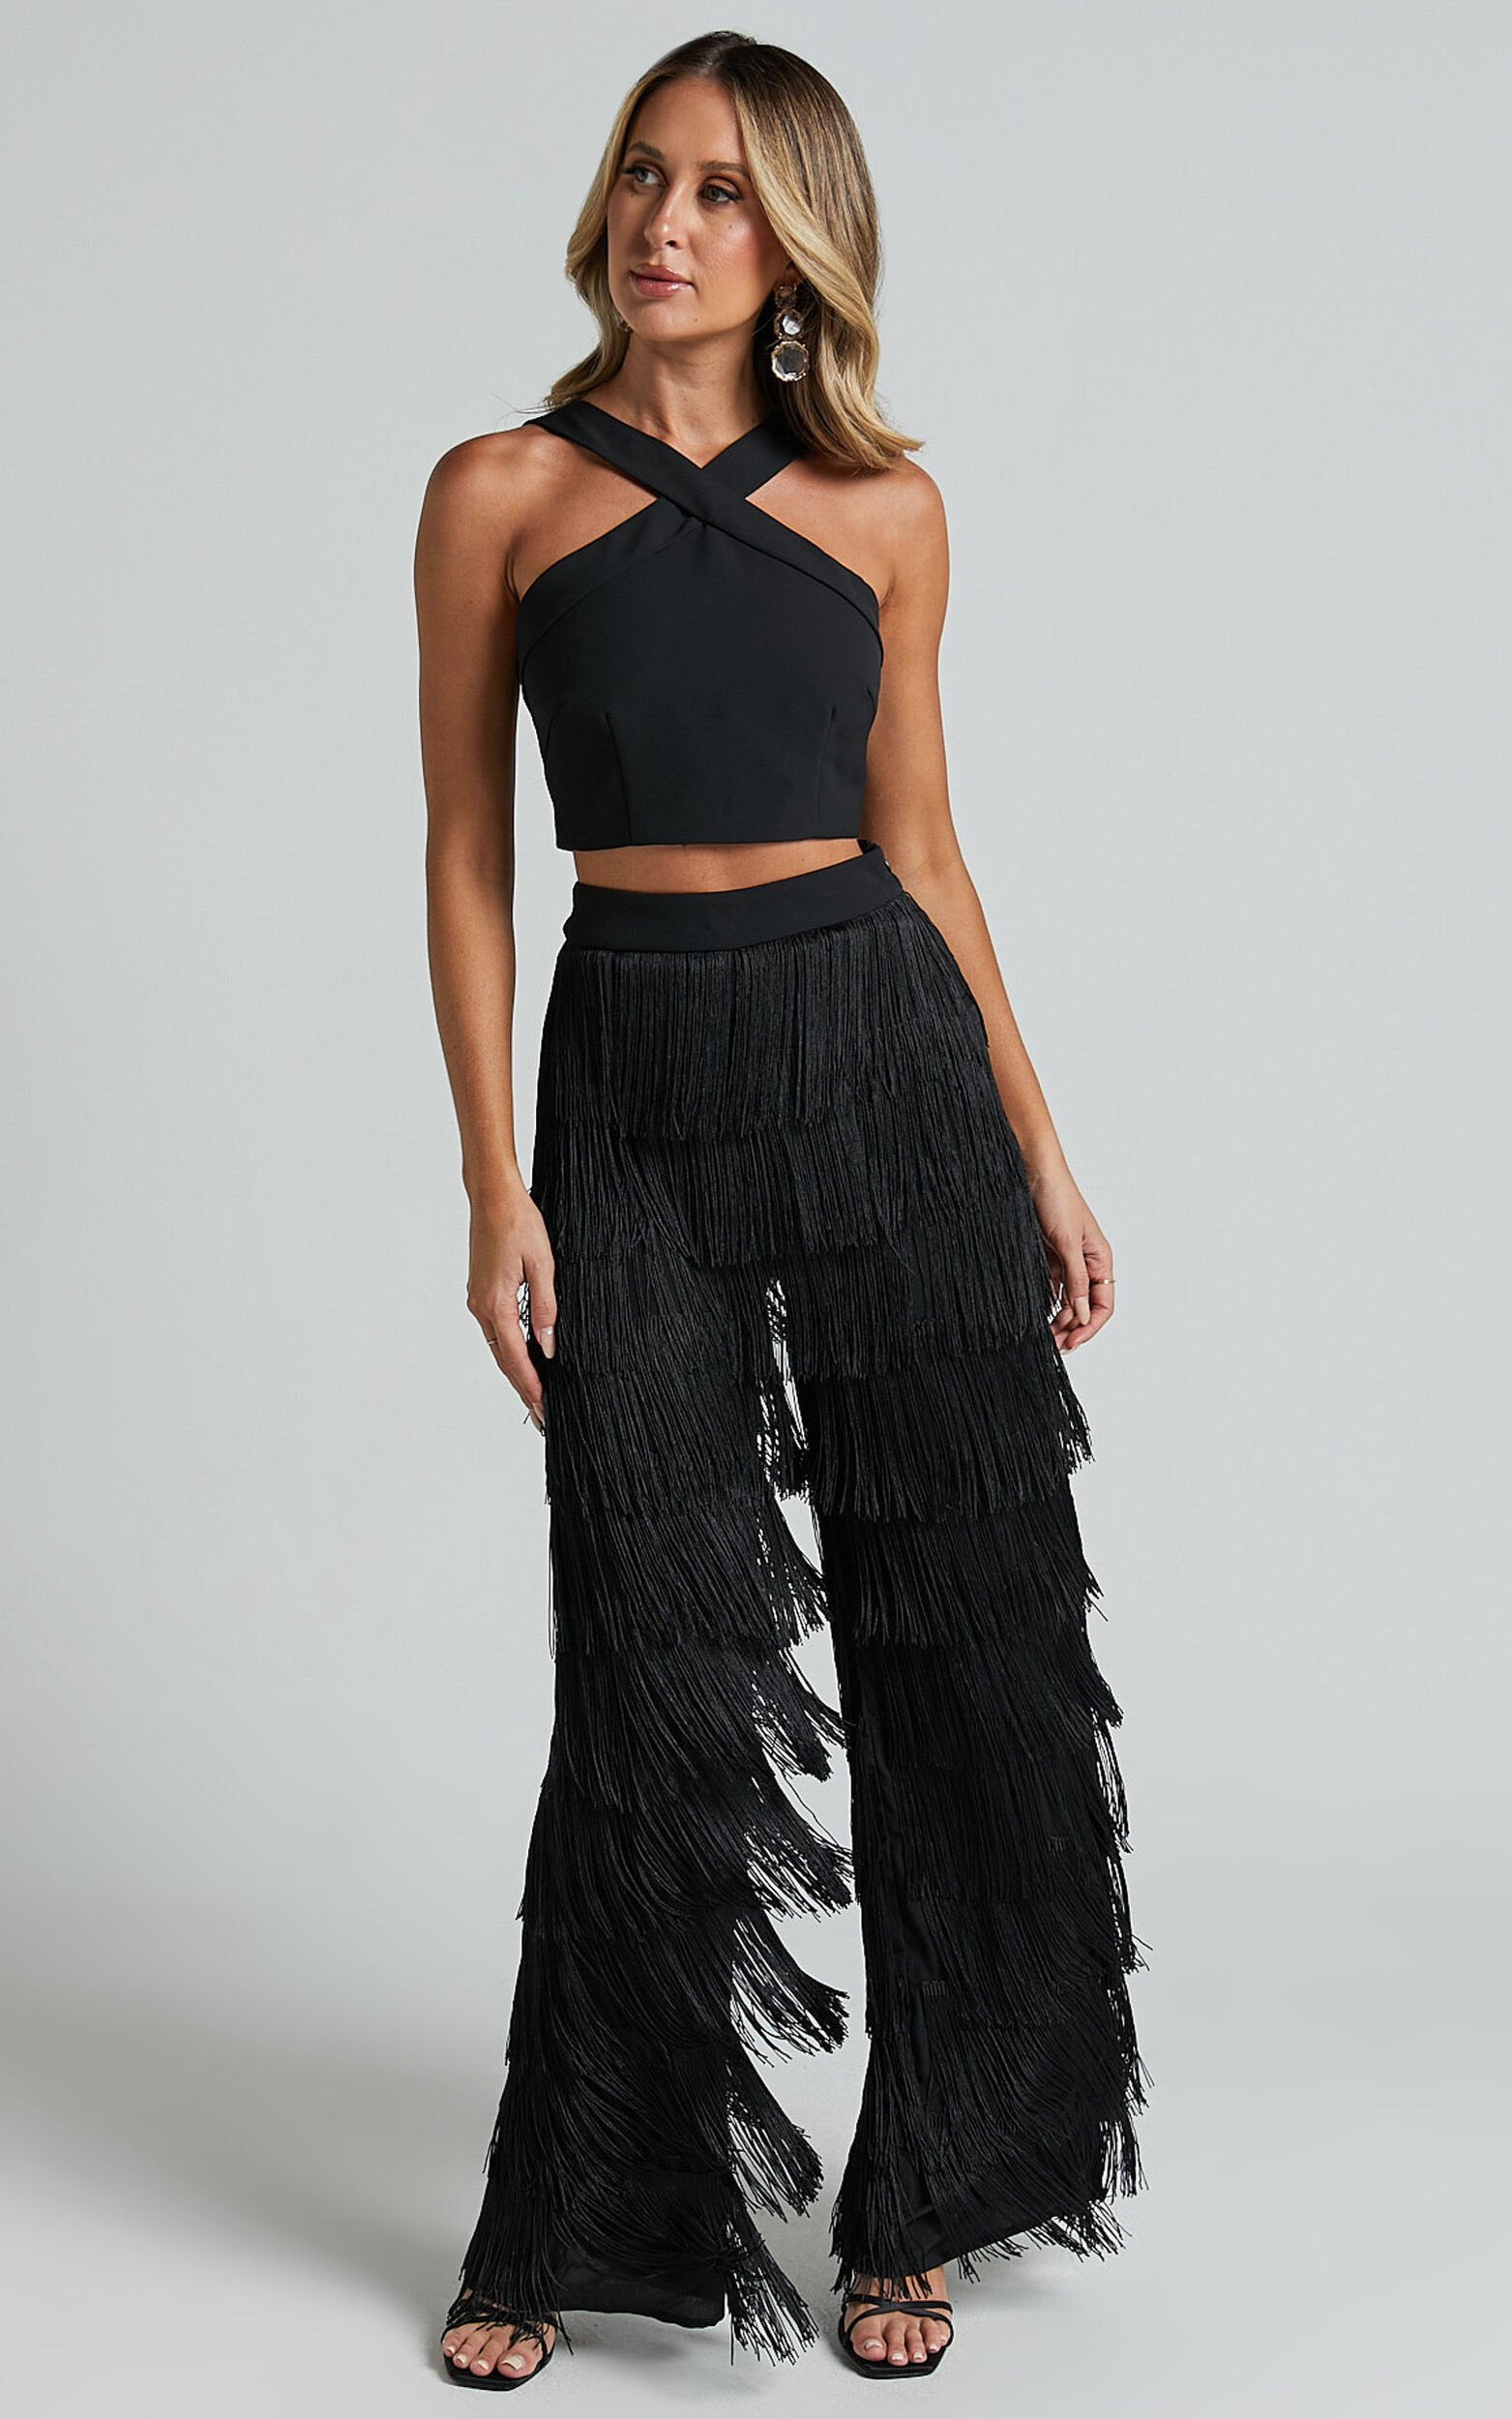 Caralyne Two Piece Set - Diamond Neck Crop Top and Tiered Fringe Pants in Black - 06, BLK1